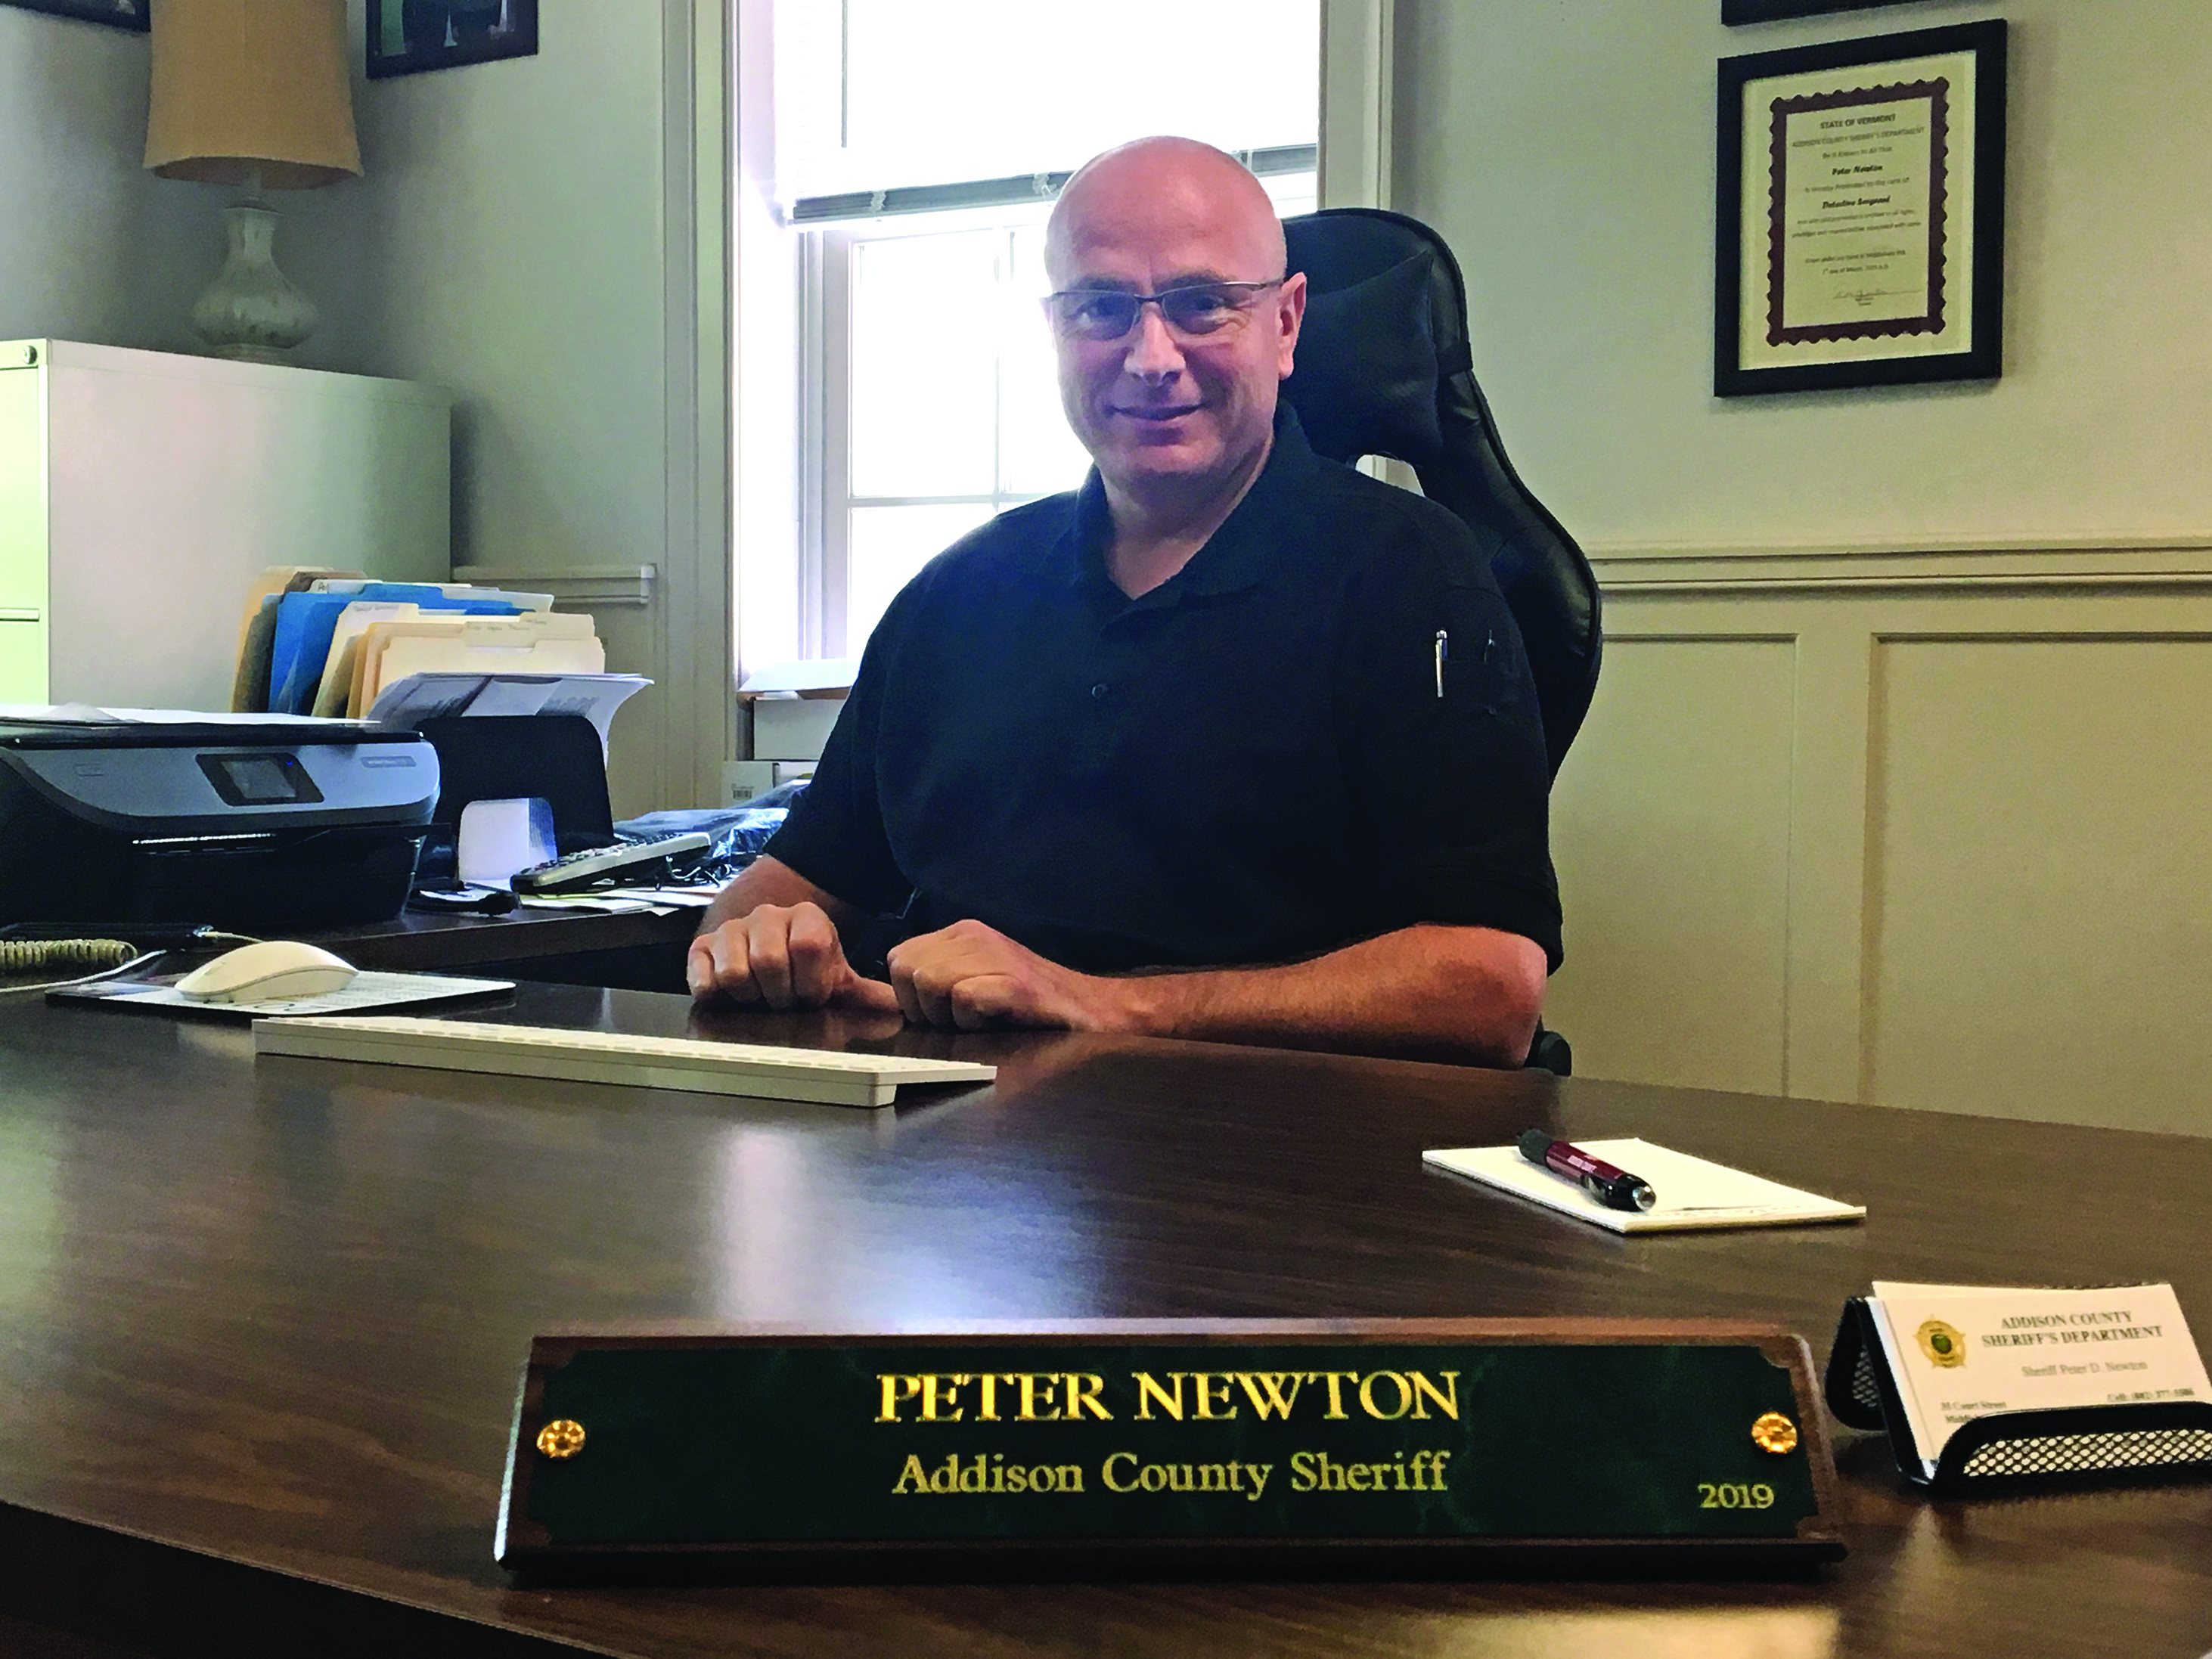 Addison County Sheriff announces retirement in emotional video